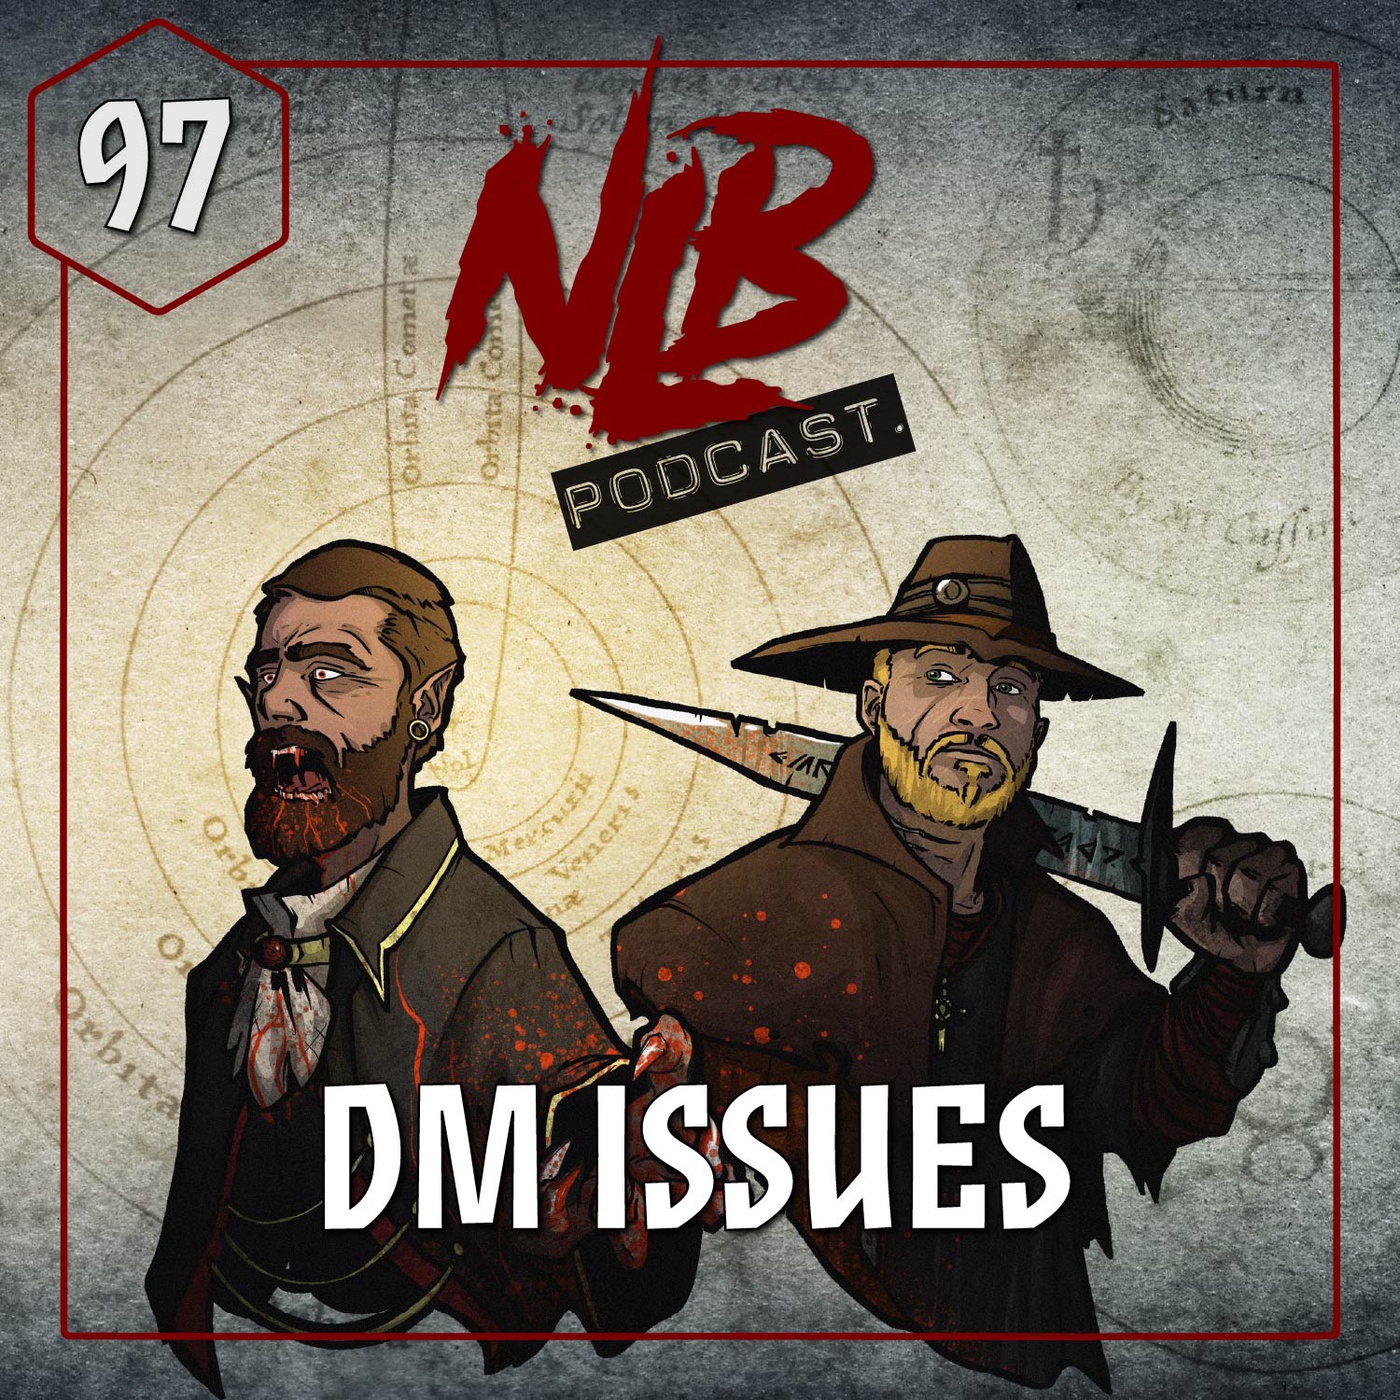 097 - DM Issues - Alles ging schief